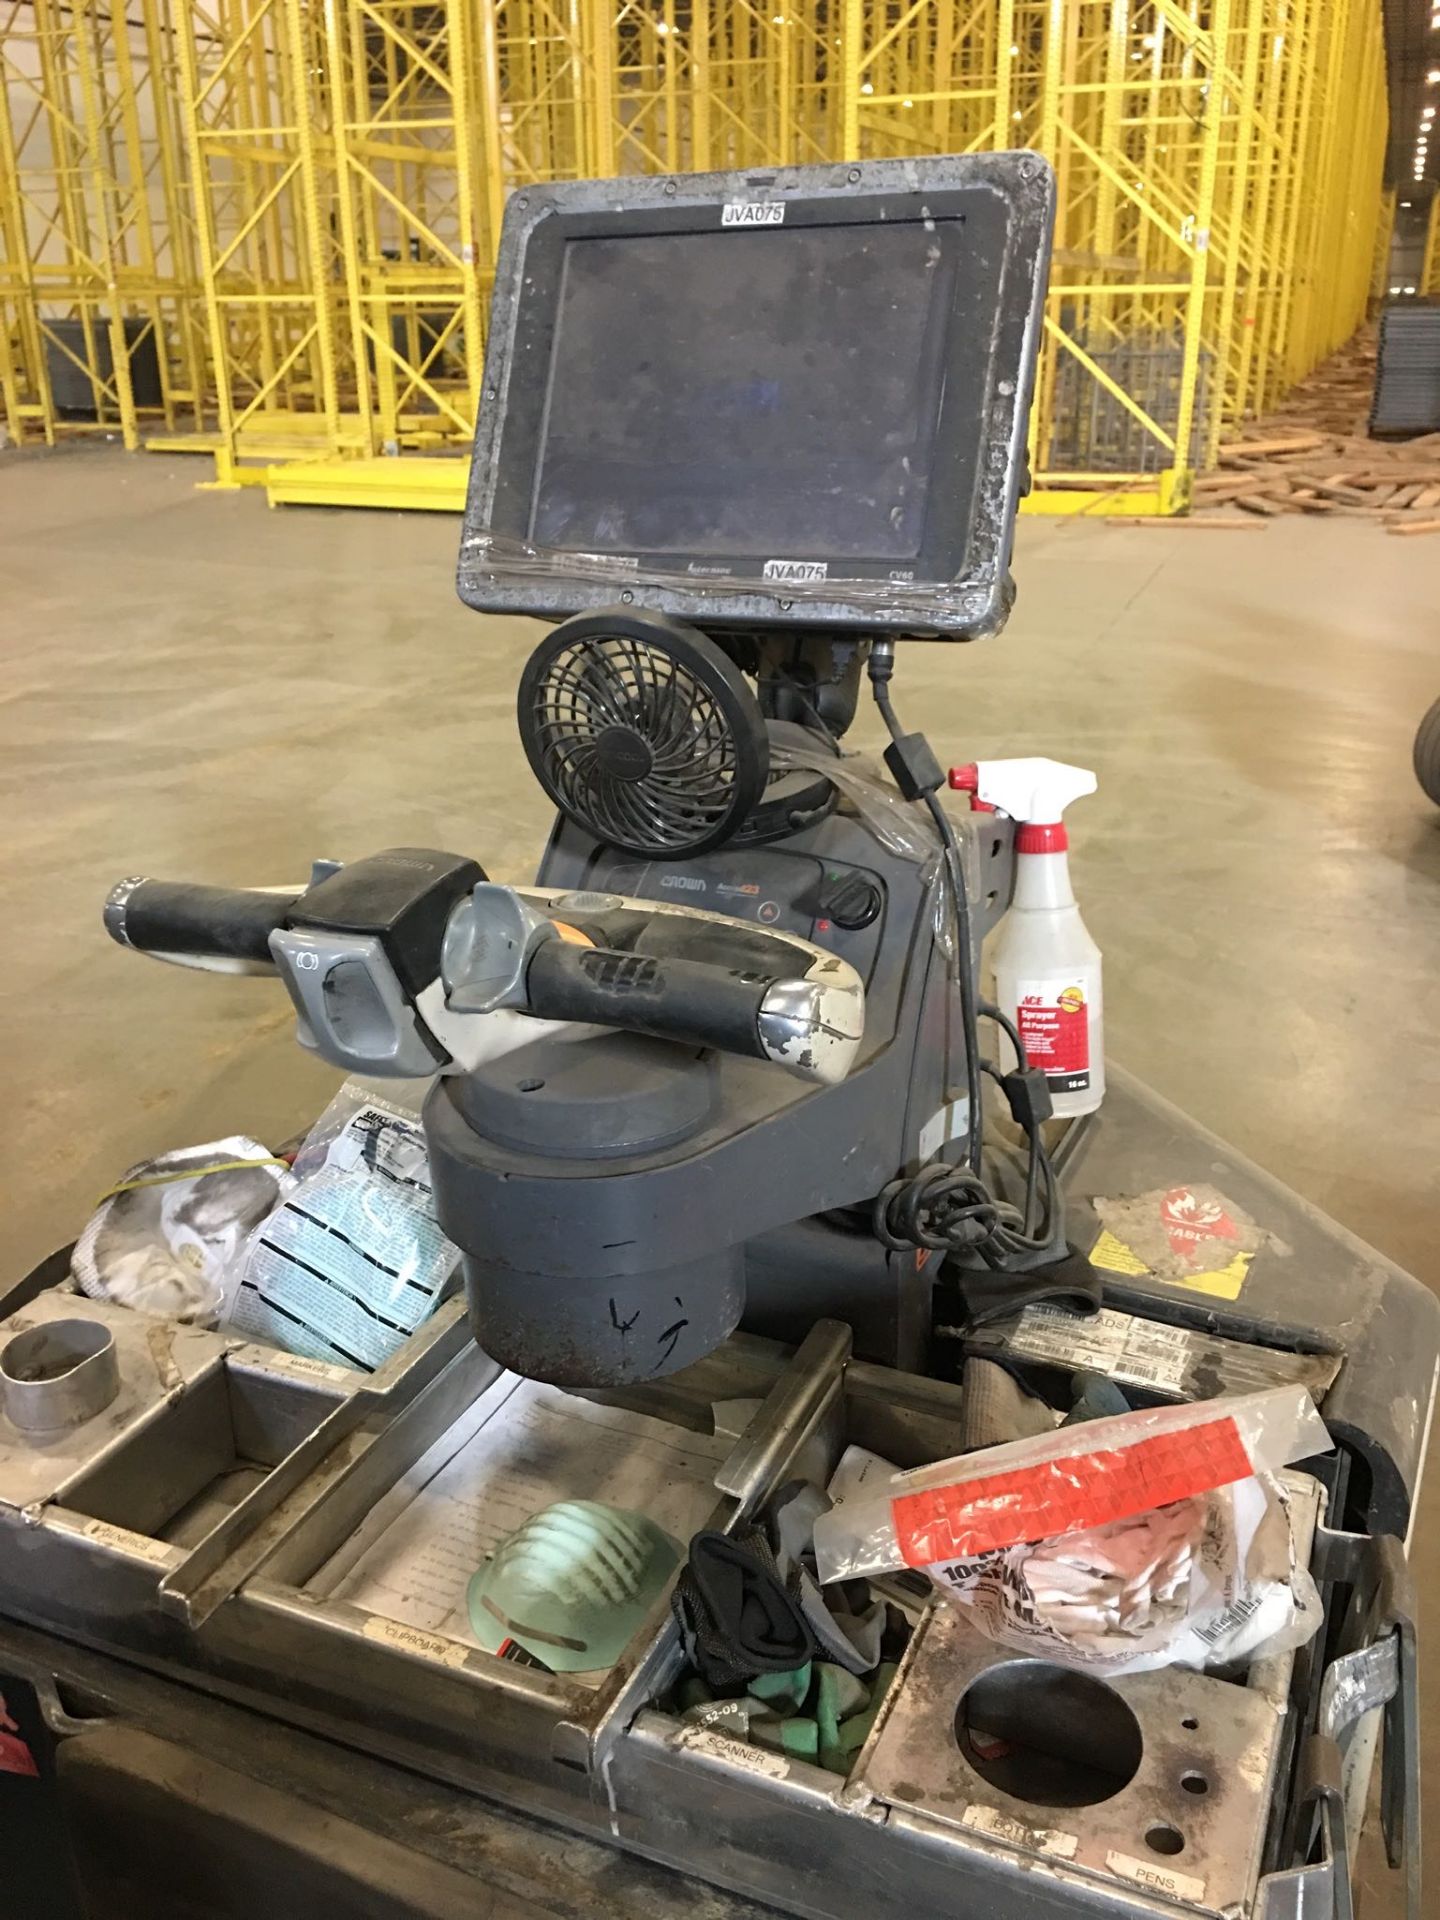 CROWN ELECTRIC PALLET JACK. Model #: PC4500-60. S/N: 6A295079. Hours (as of Oct 15, 2018): 3275. - Image 2 of 3